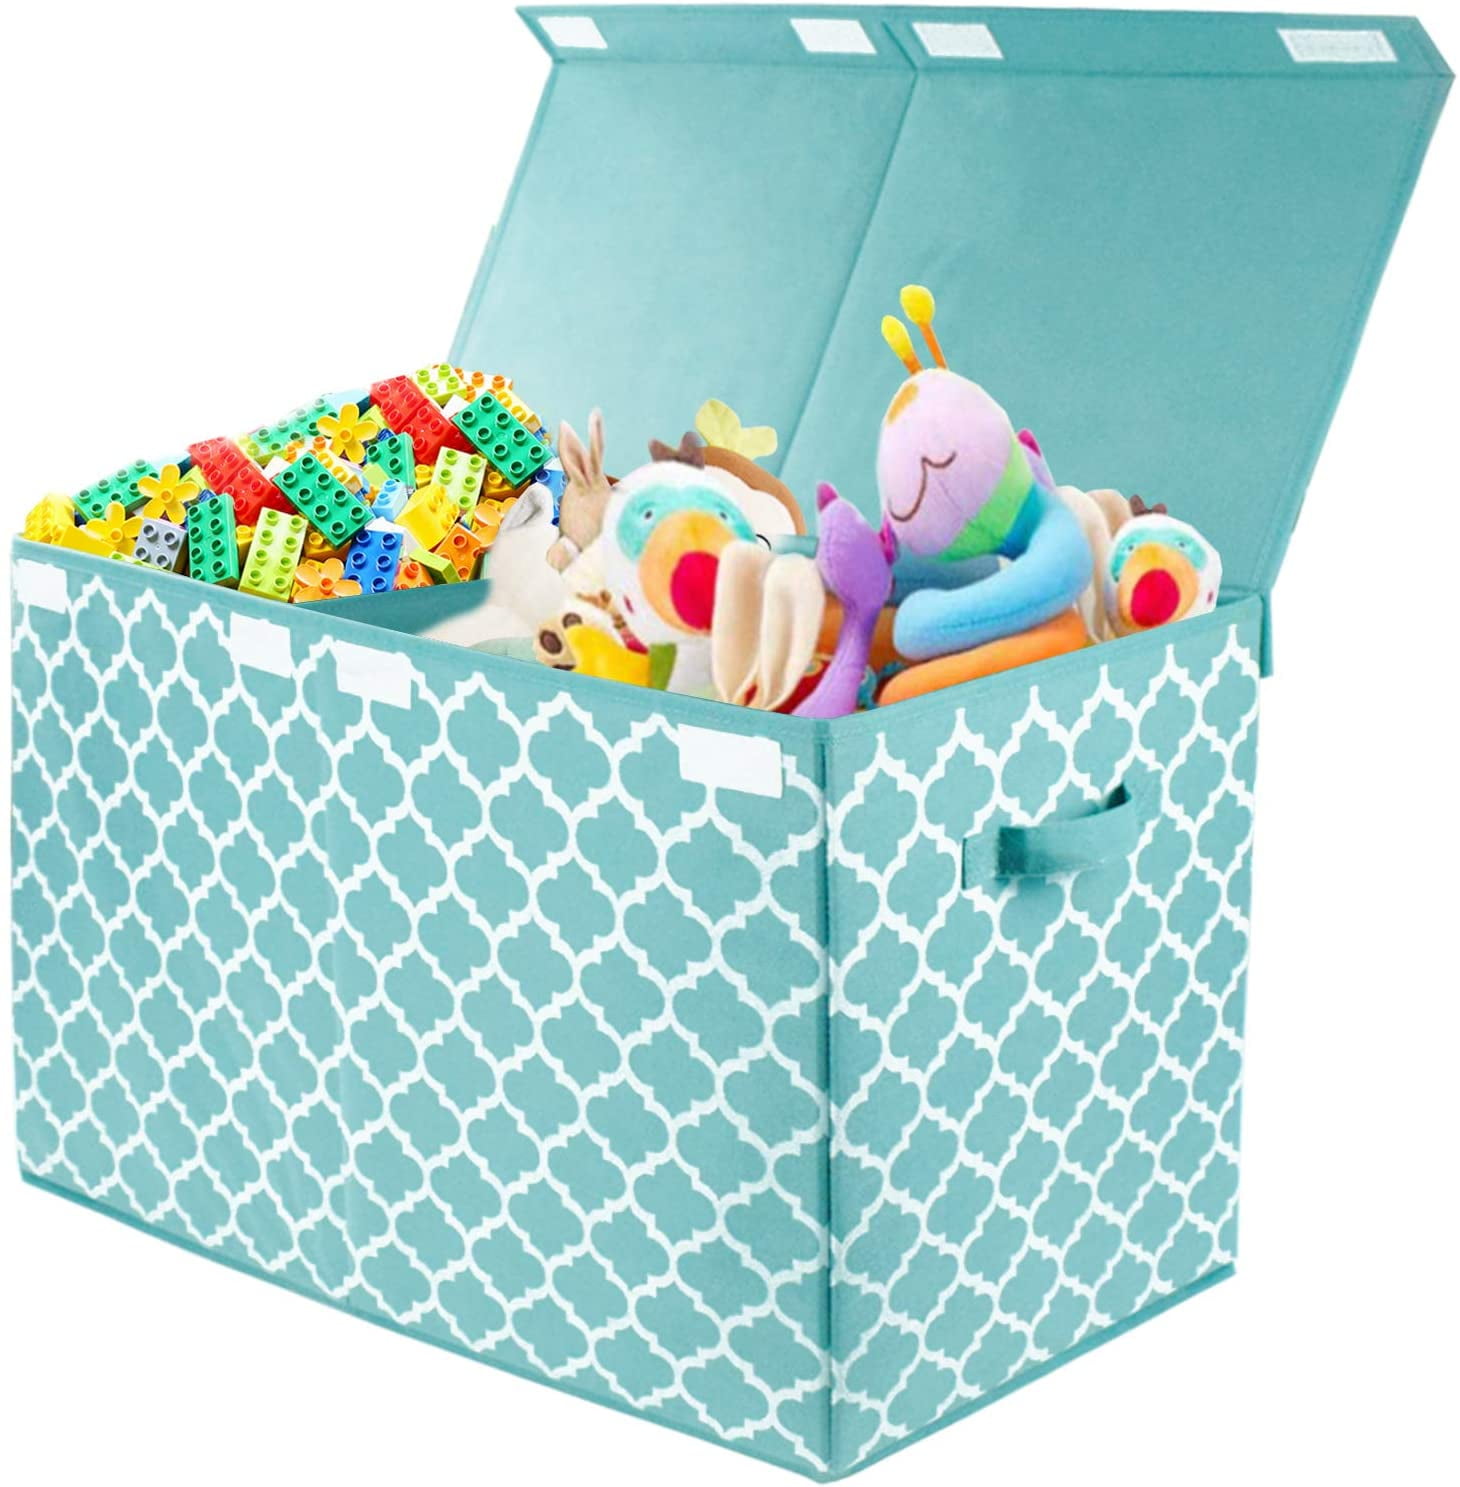 Yosayd Kid Toys Chest Cube Storage Box Large Collapsible Decorative Storage Bin with Lid for Boys Girls Playroom,Room,Nursery,Closet